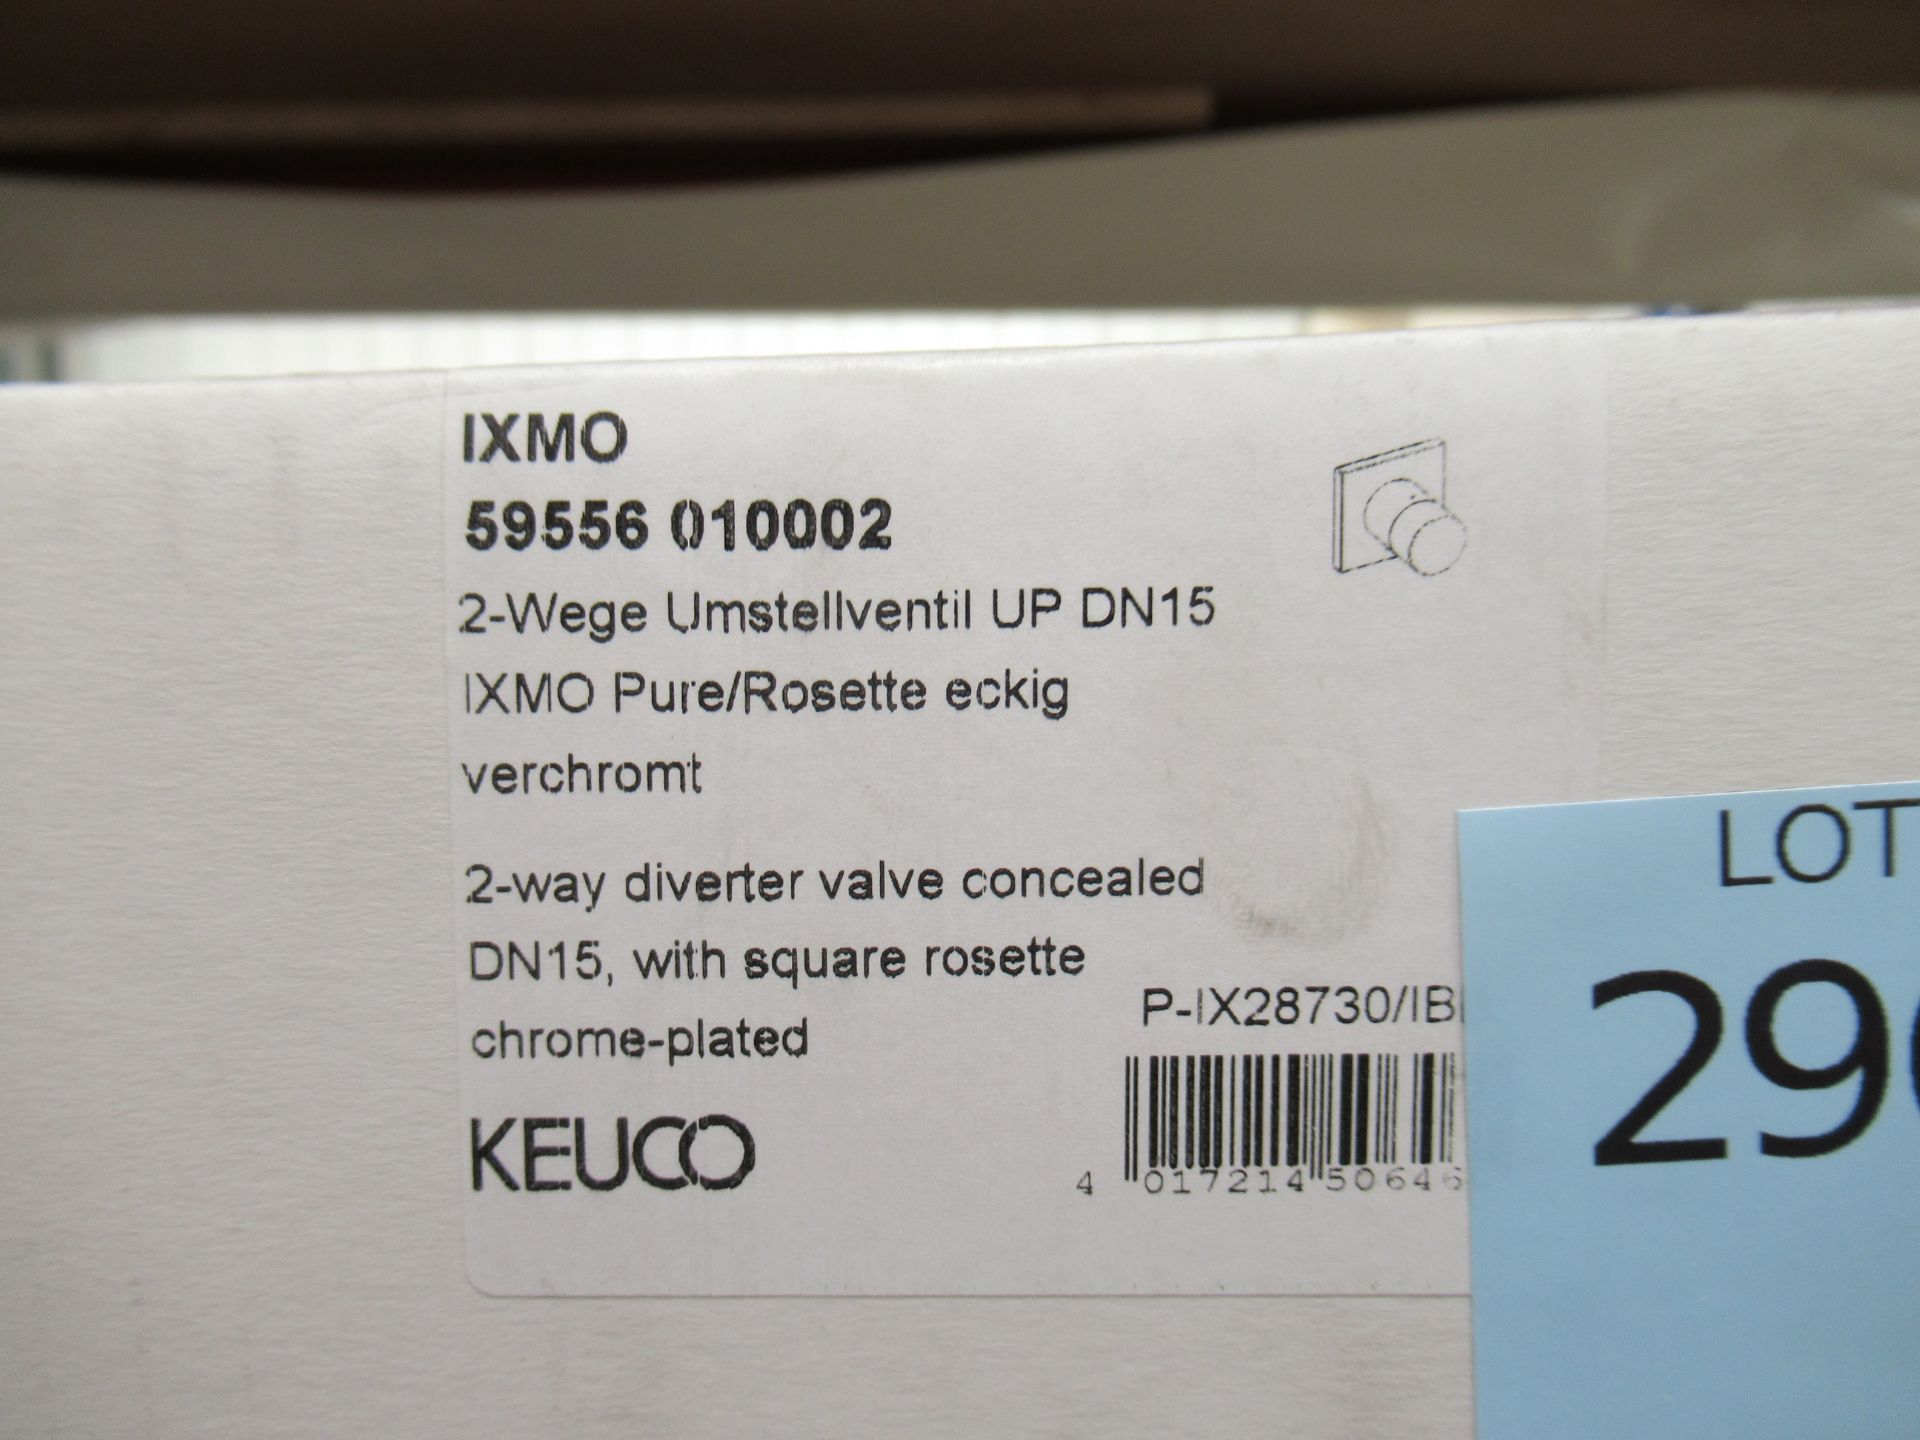 3 x Keuco IXMO 2 Way Diverter Valve Concealed, Chrome Plated, P/N 59556-010002 - Image 2 of 2